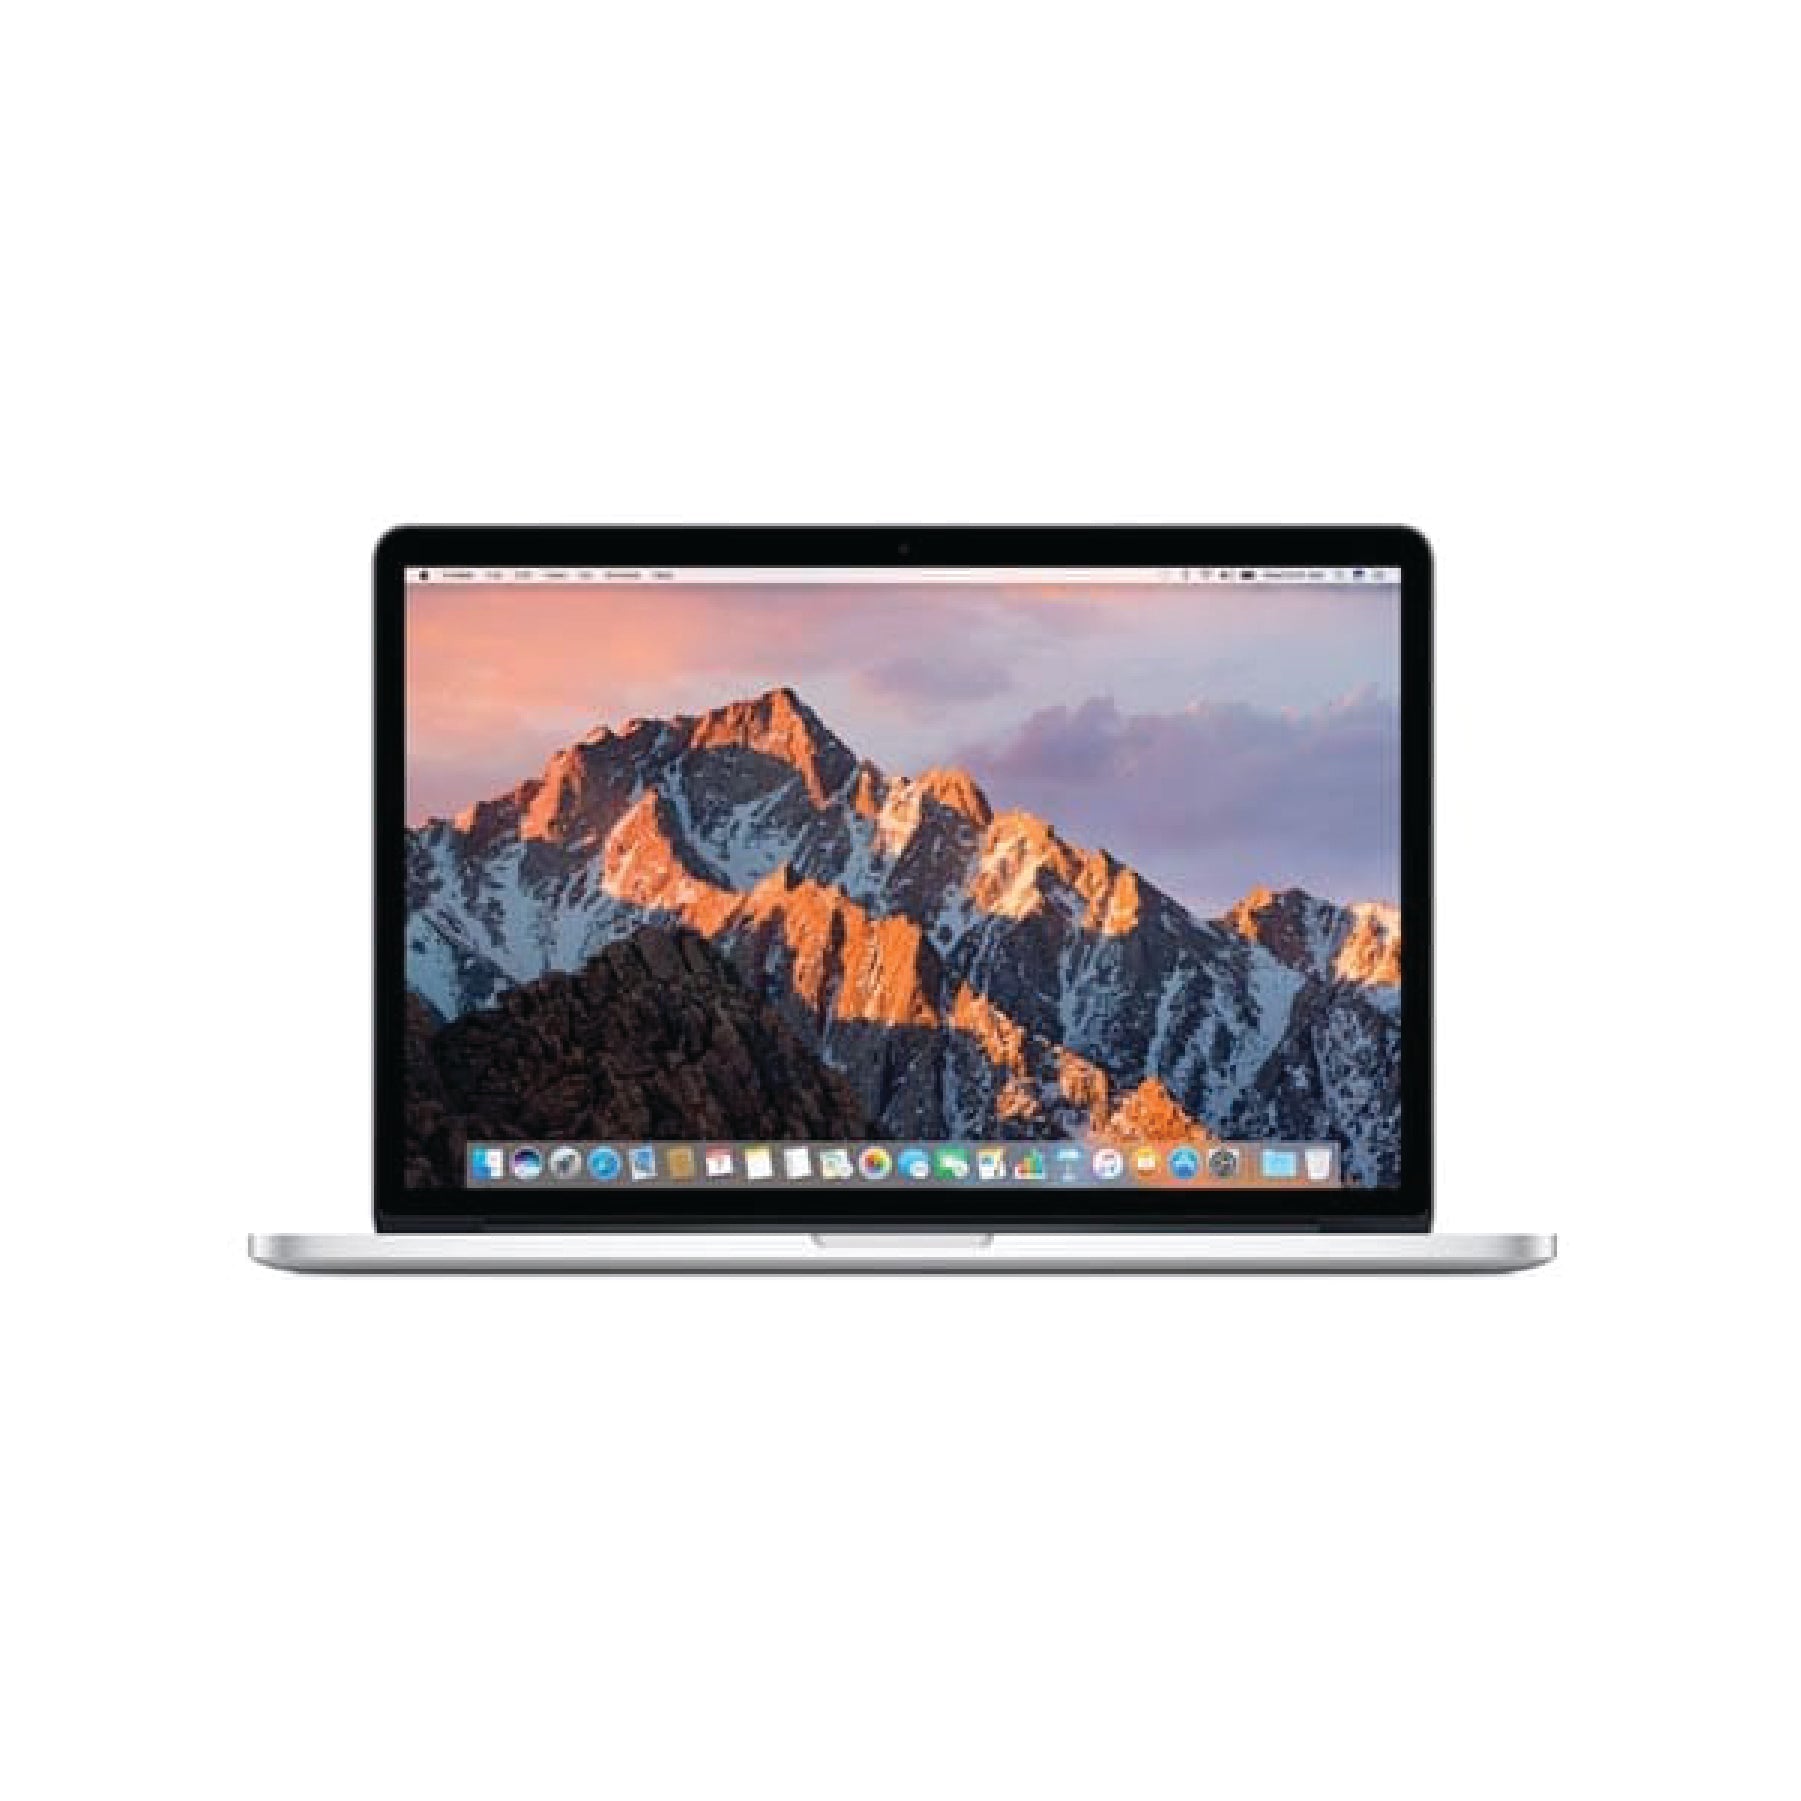 MacBook Pro (Retina, 13-inch, Early 2015) 2.9GHz, Intel Core i5 512GB - Silver (Good) - iStore Pre-owned